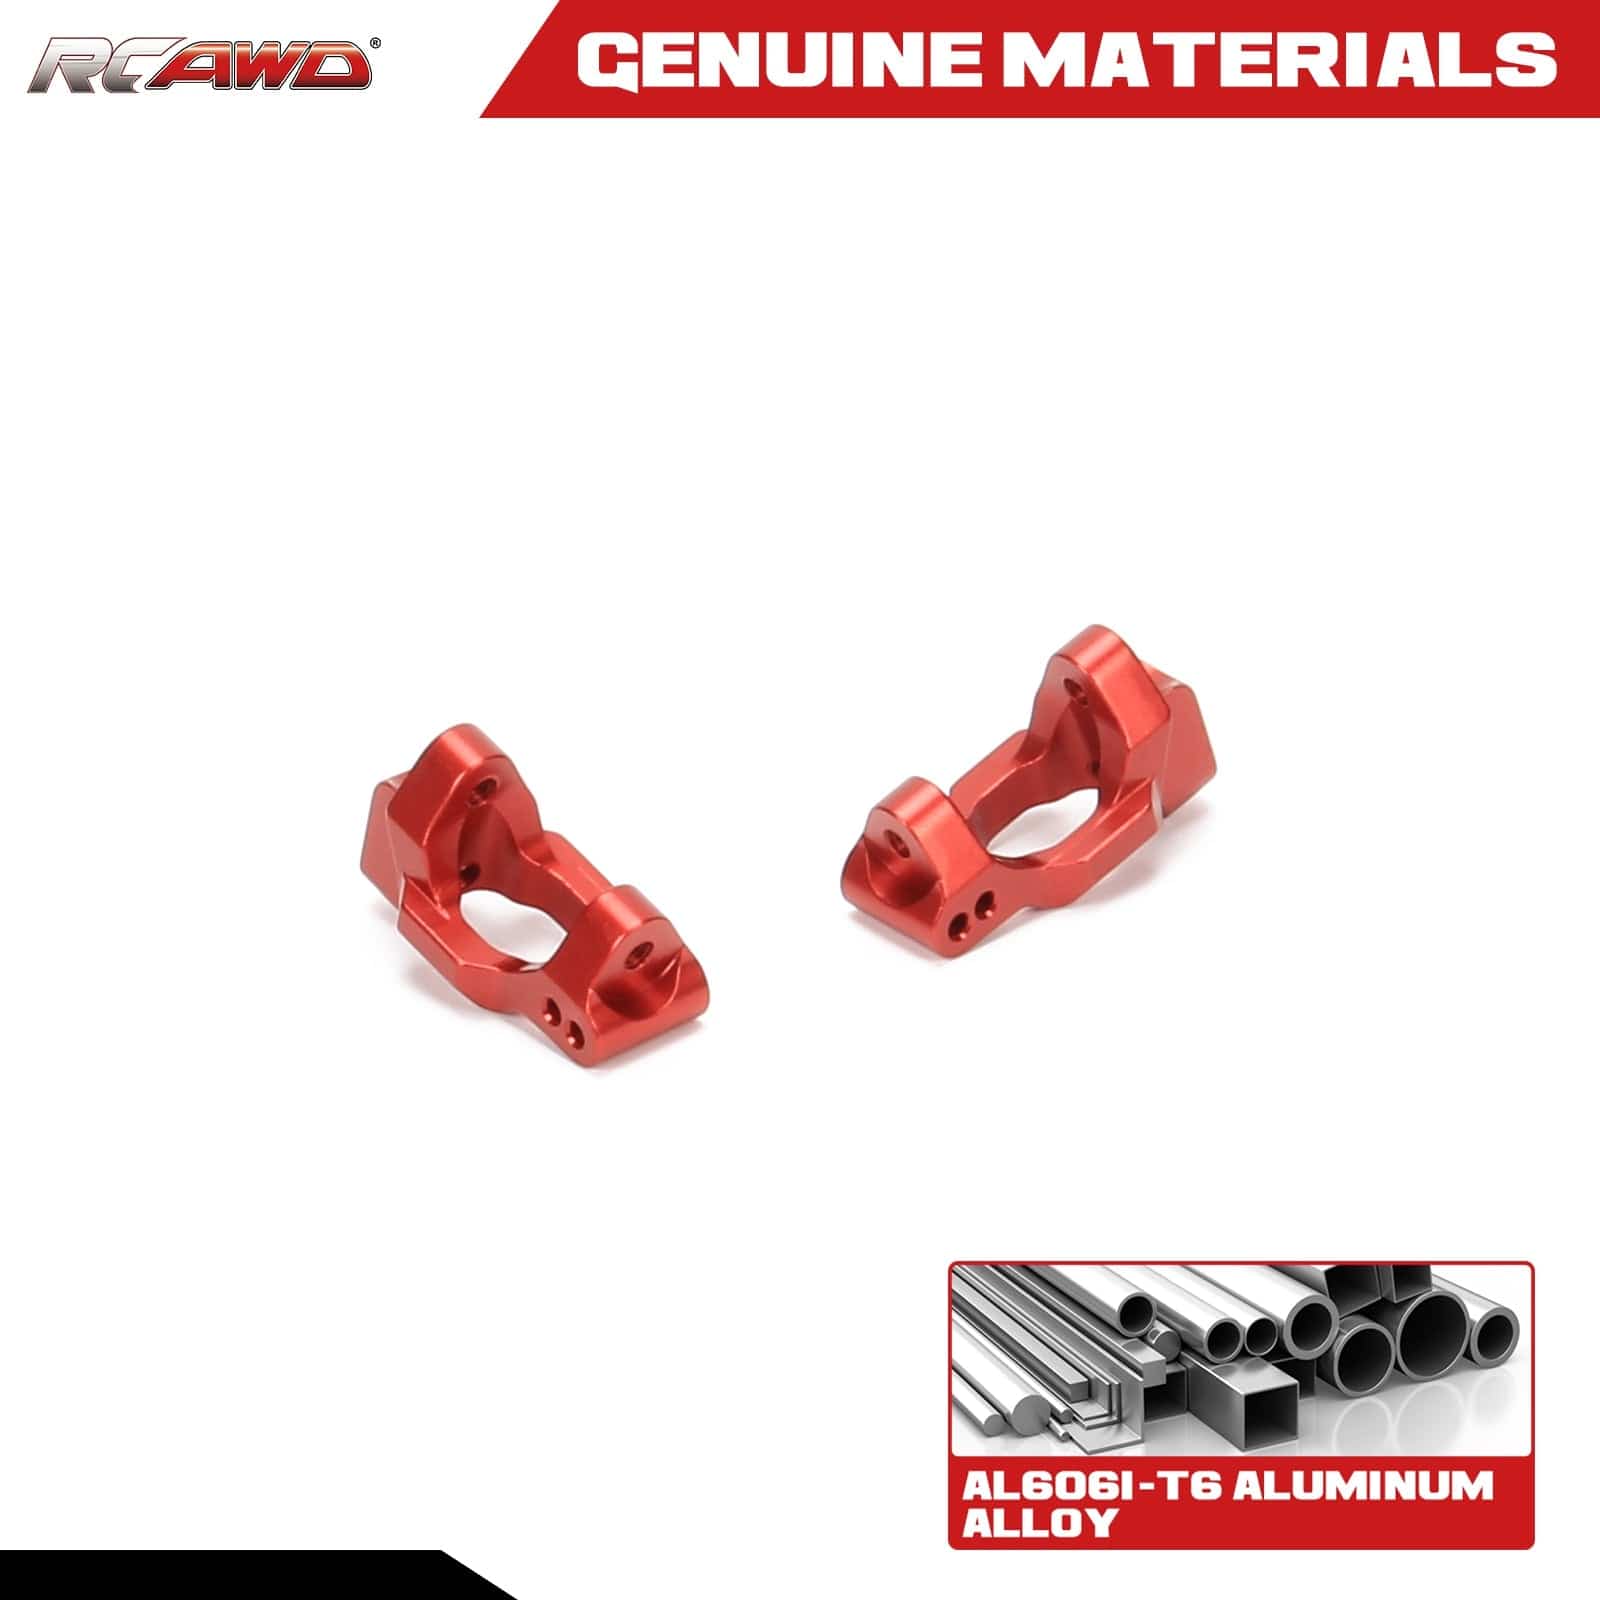 RCAWD TRAXXAS SLASH RCAWD RC Aluminum Caster blocks (c-hubs) 2pcs for 1/18 Traxxas Upgrade Parts